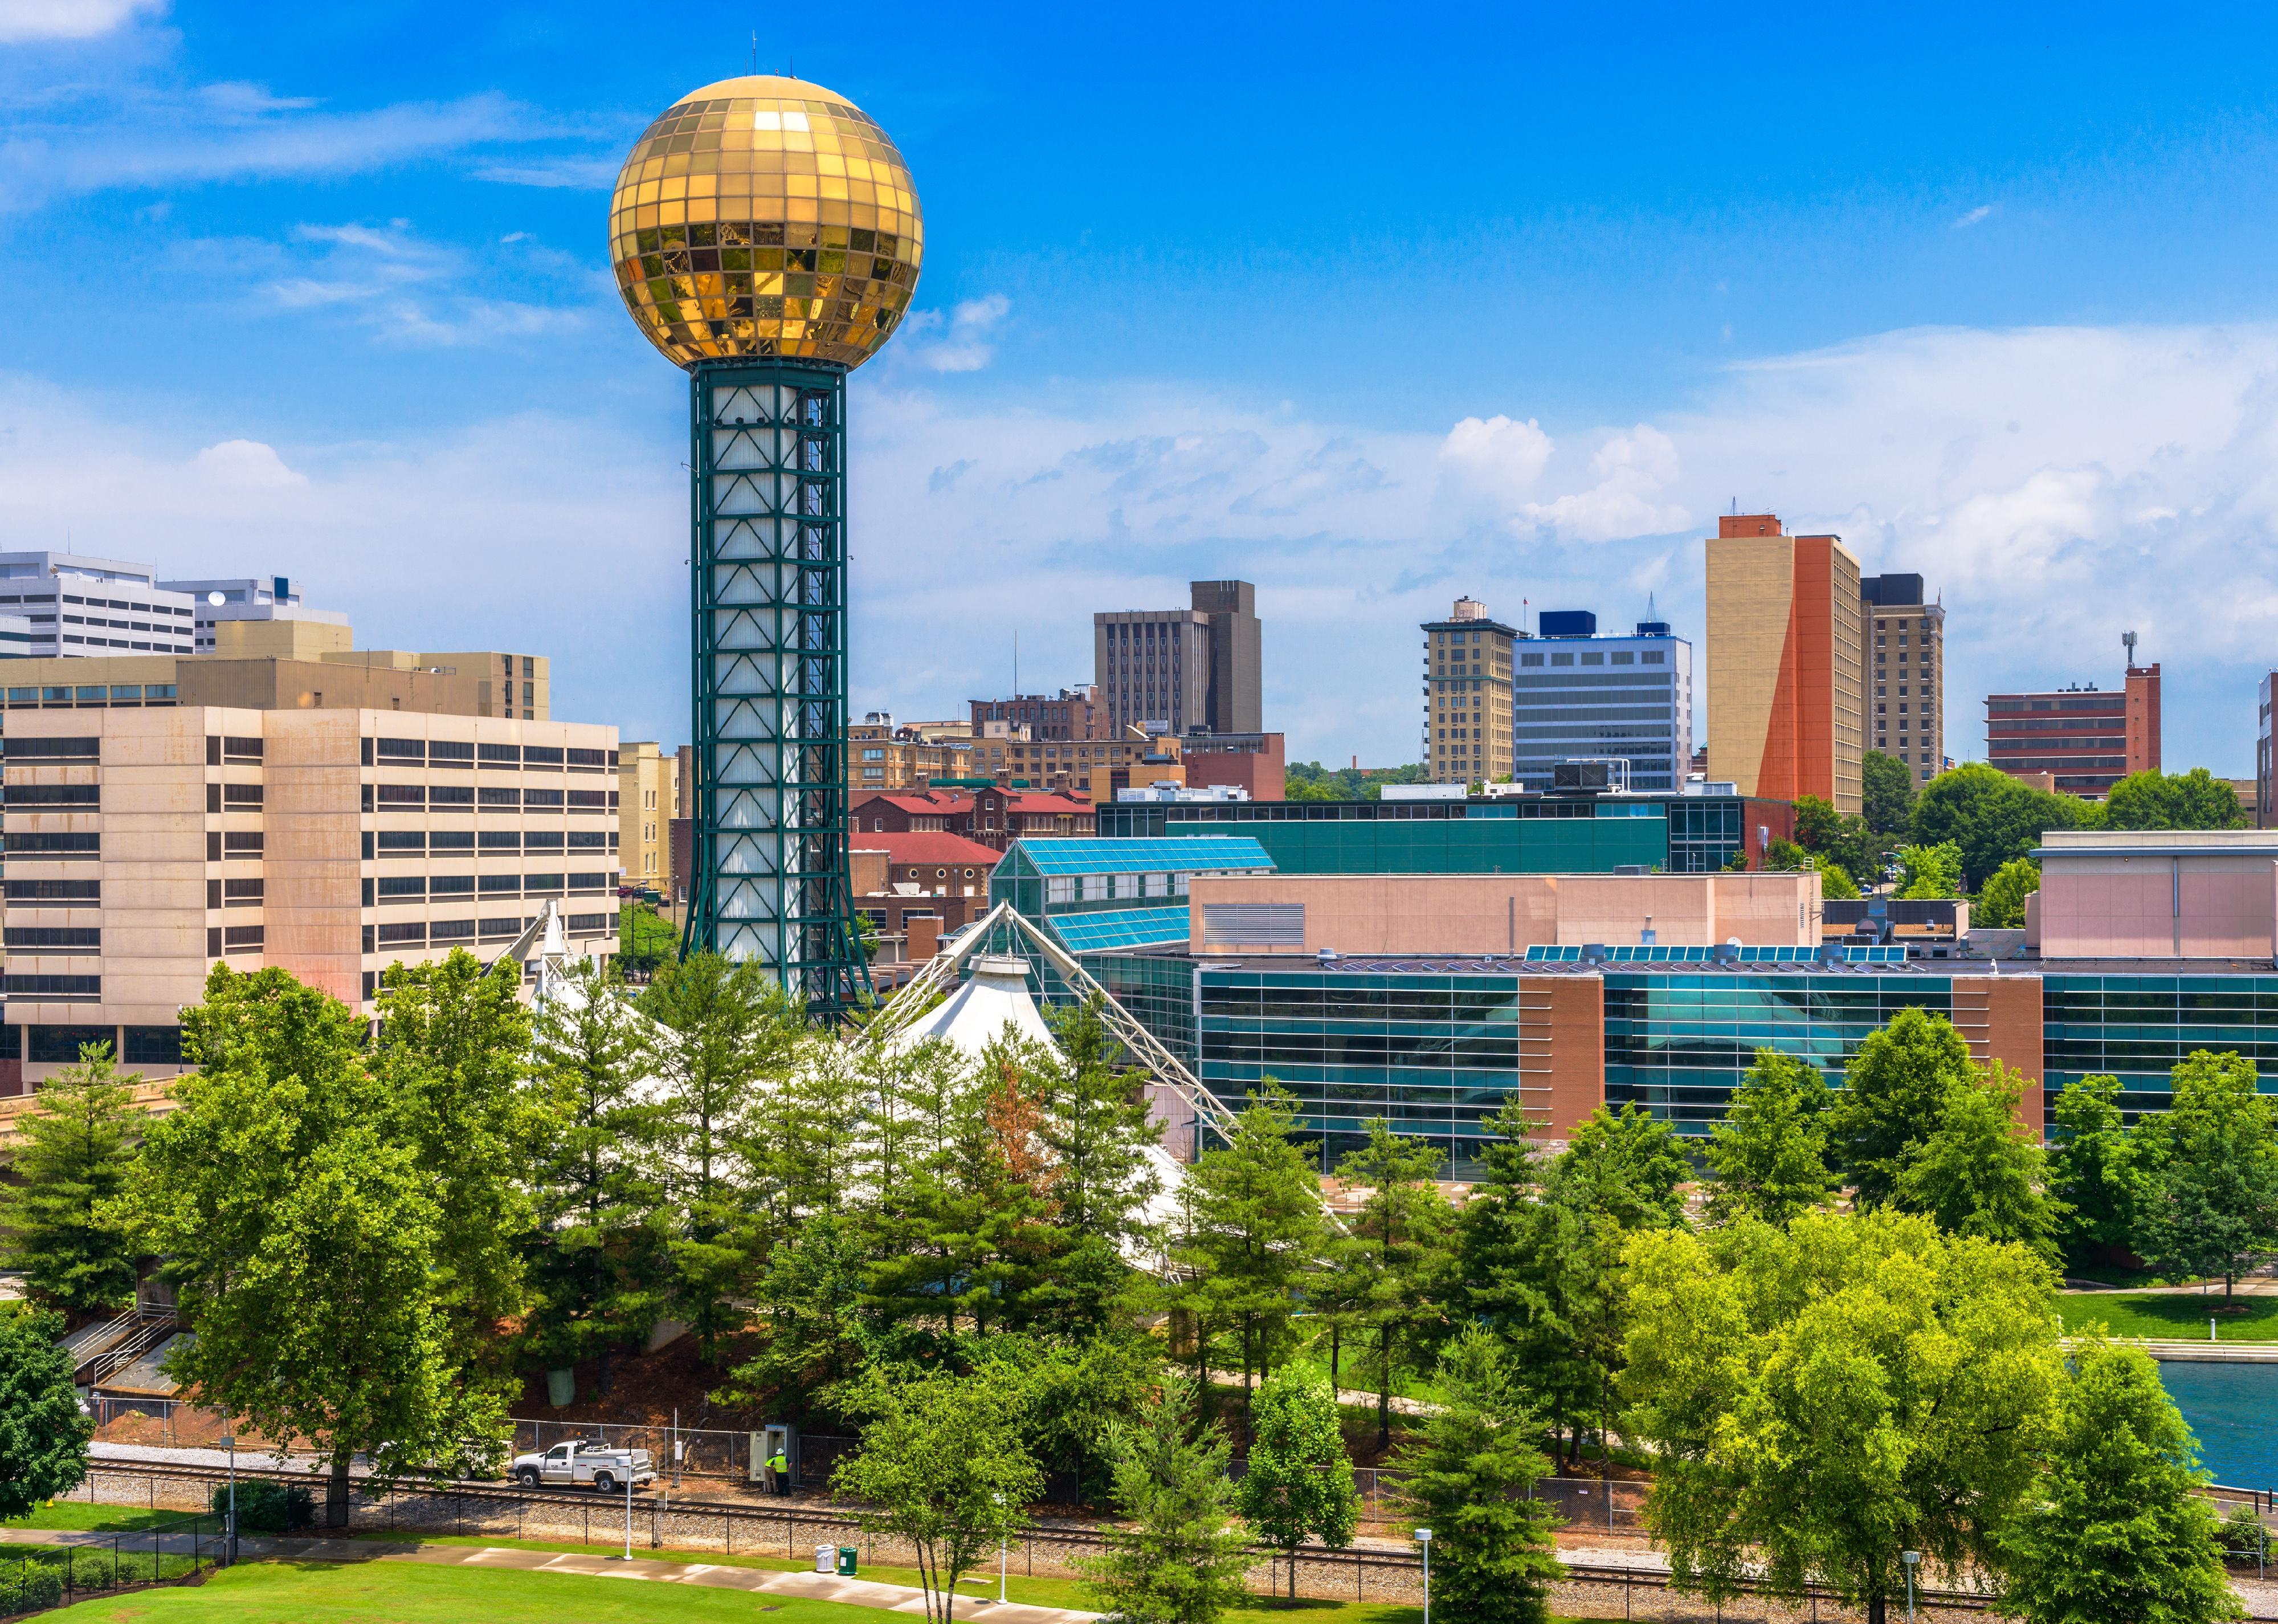 The Sunsphere is a prominent fixture in Knoxville's skyline.